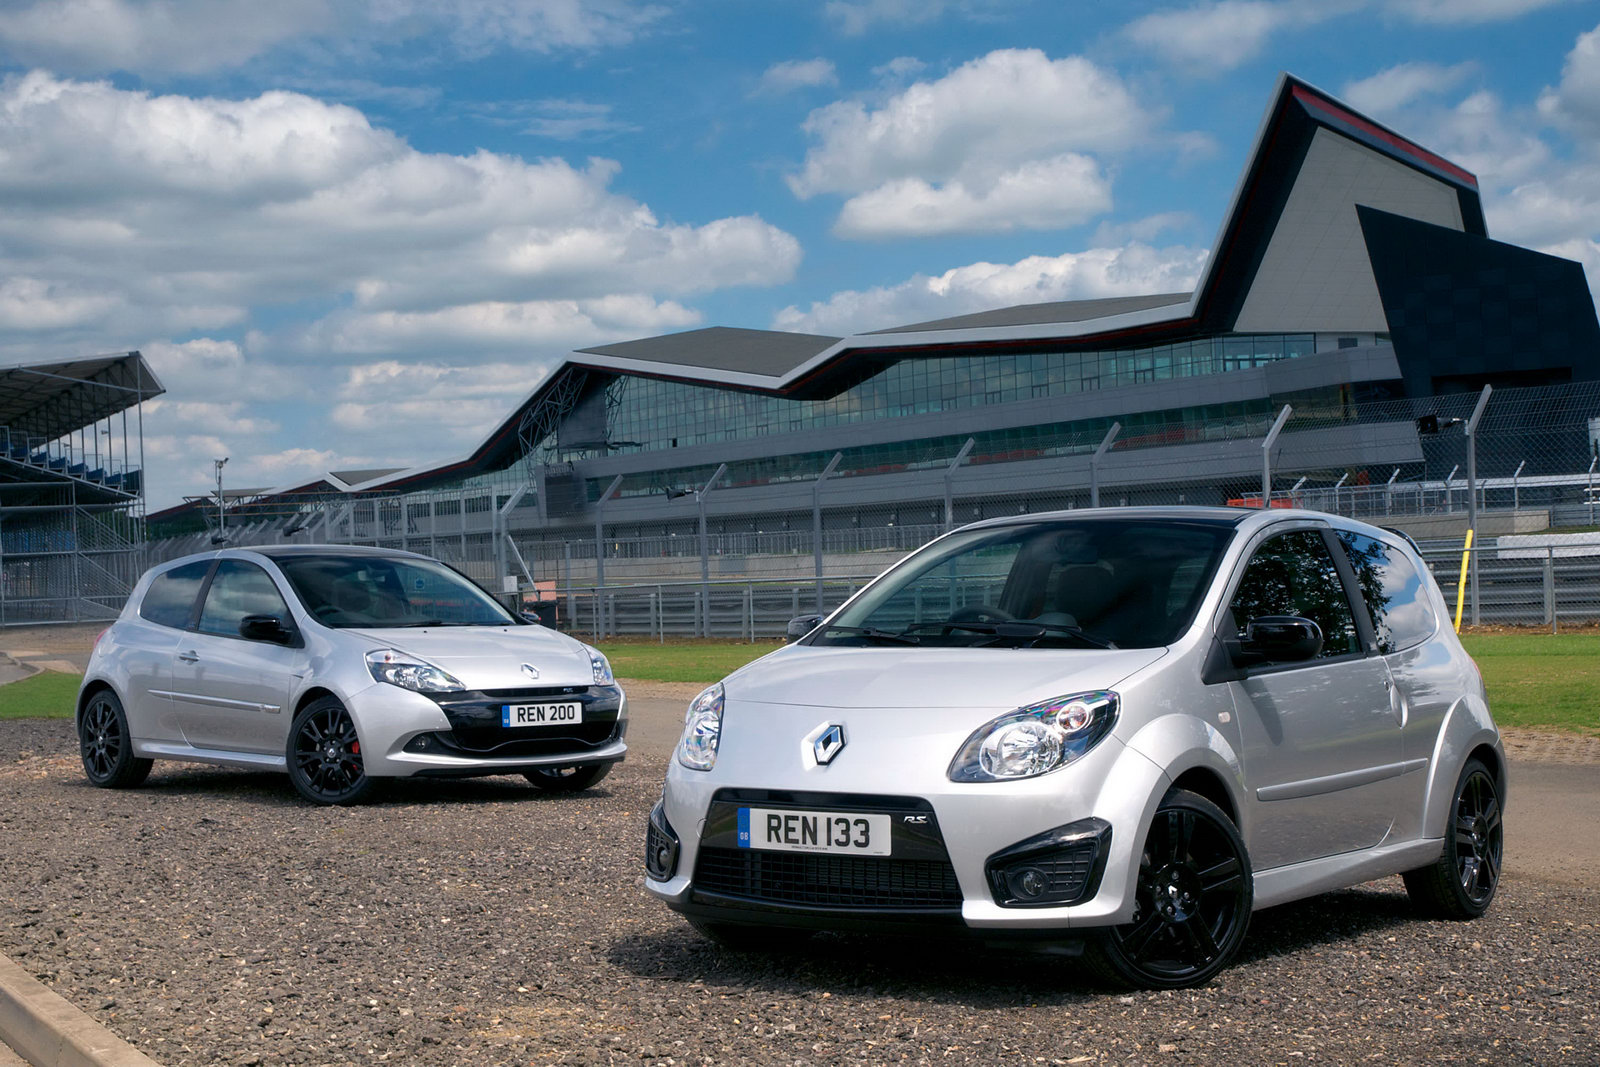 Renault Twingo RS 133 and Clio RS 200 Silverstone GP